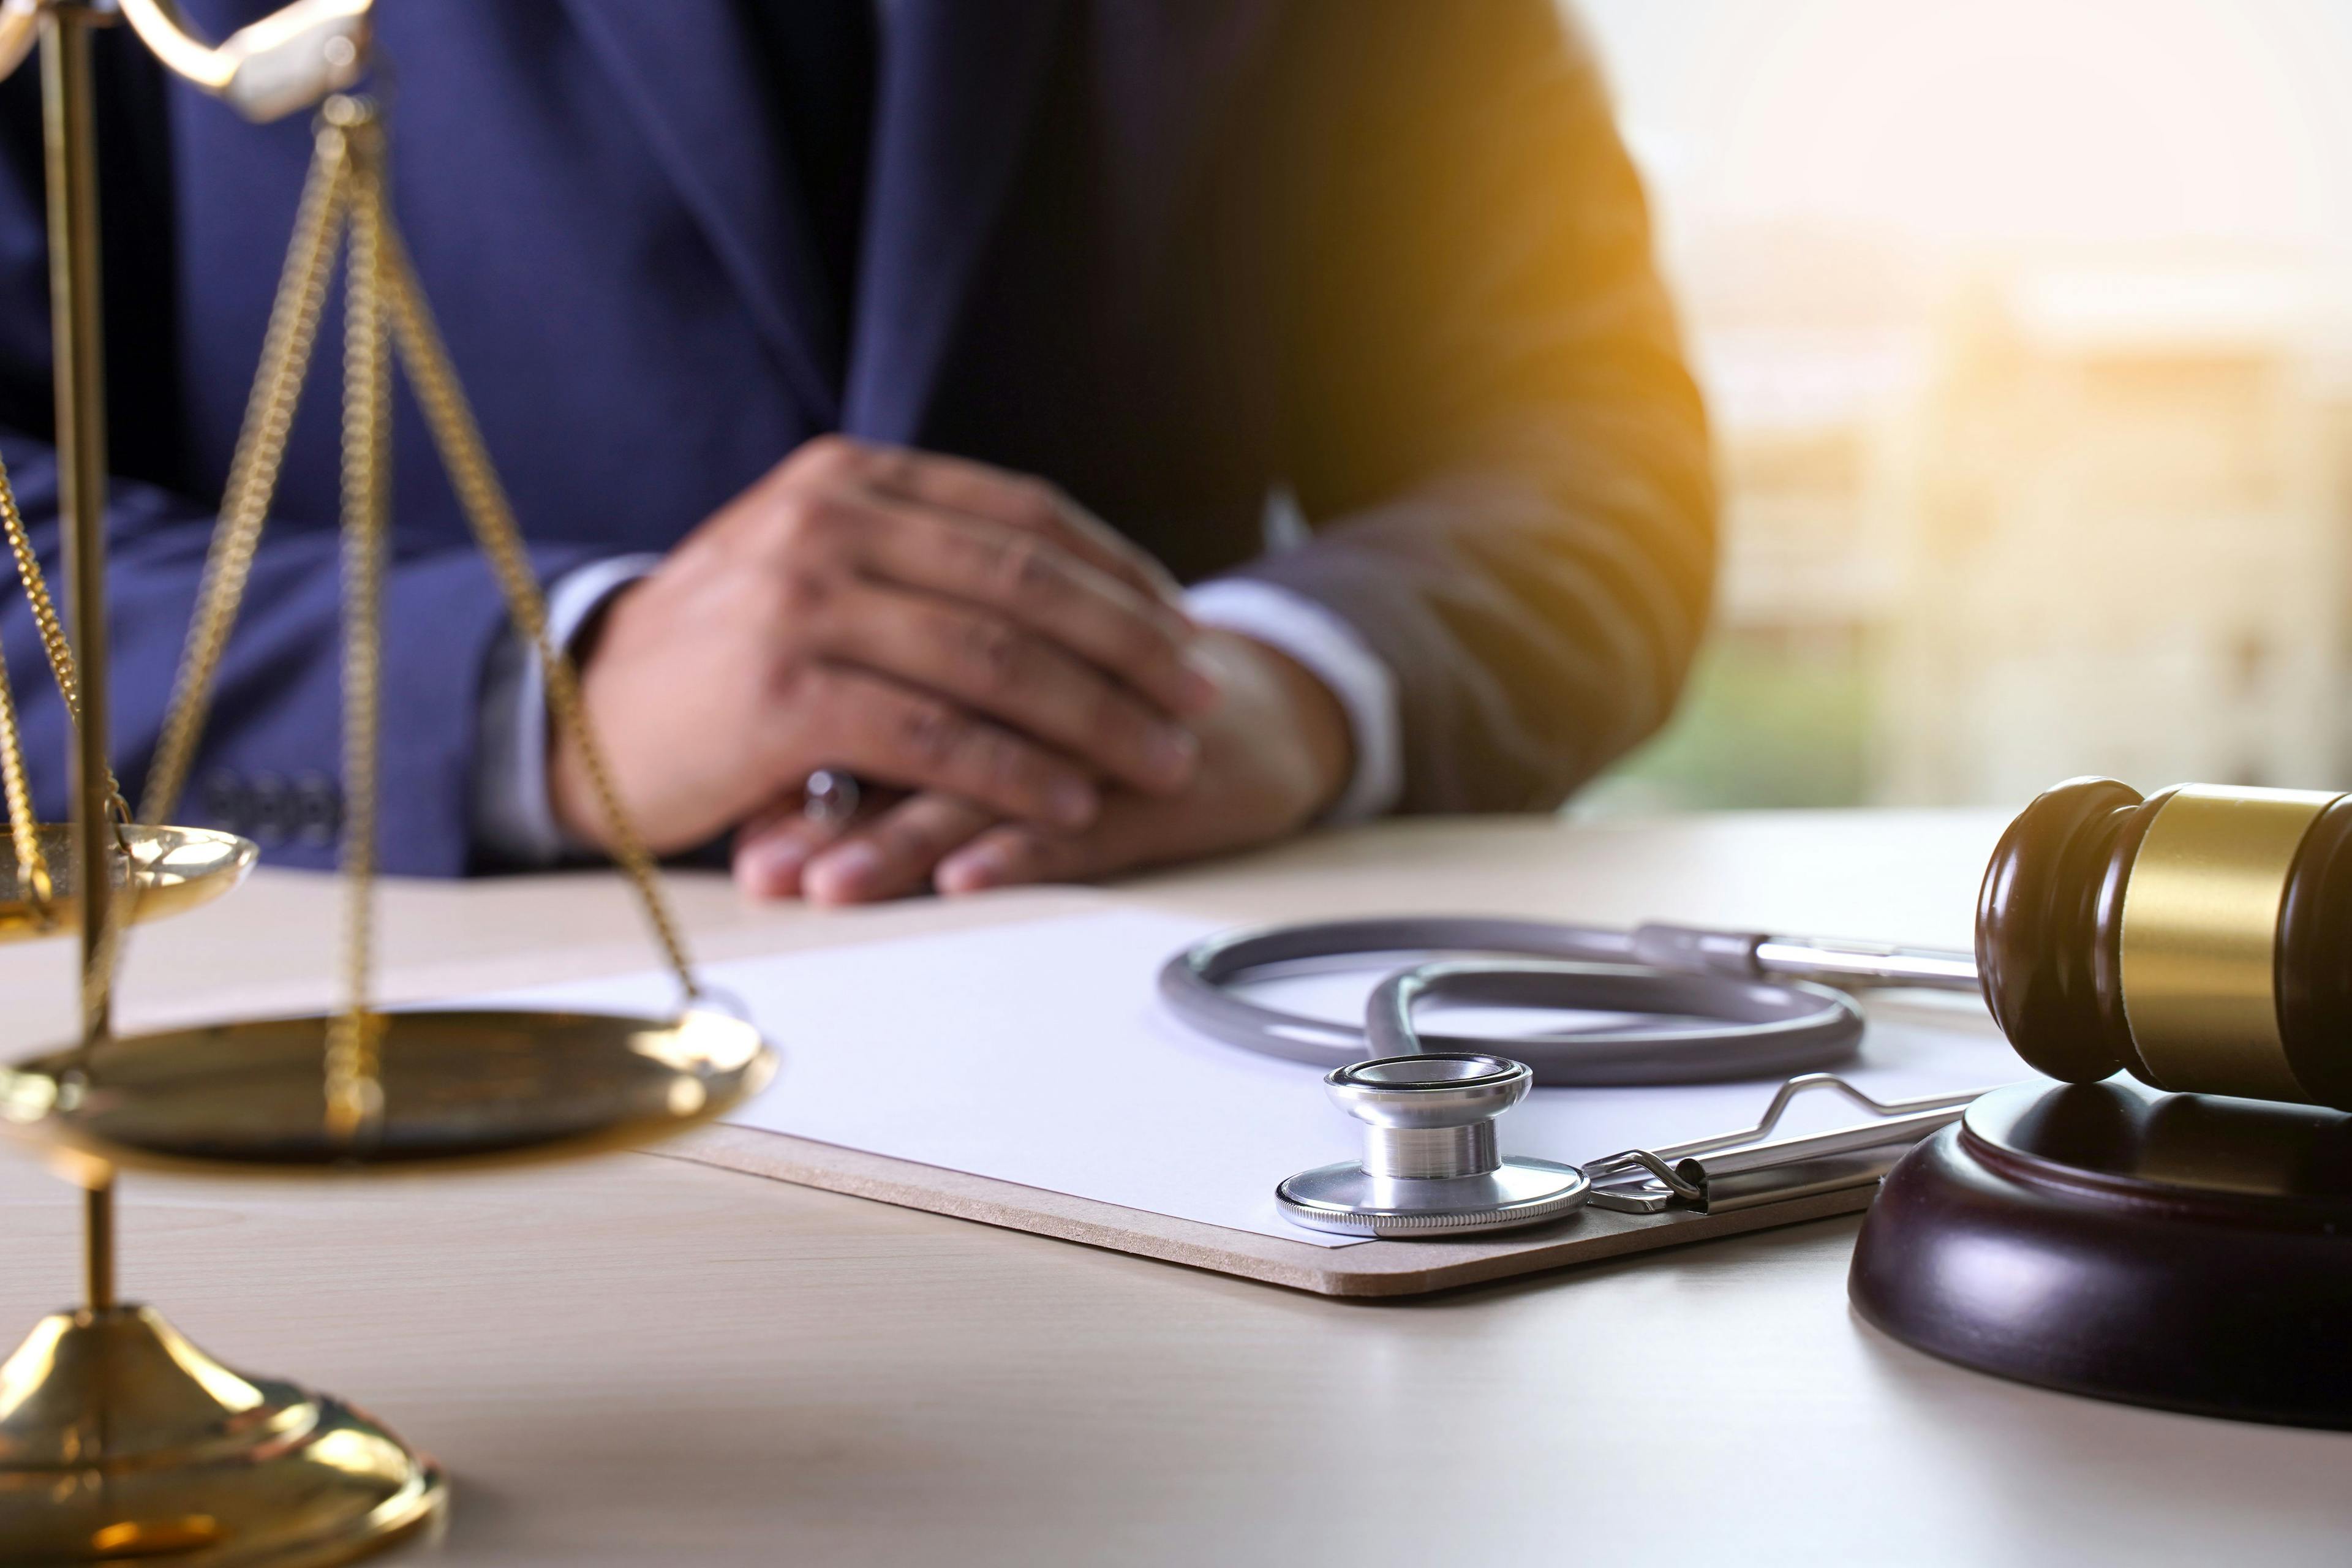 Here’s how tort reform can help improve patient outcomes and reduce health care costs.